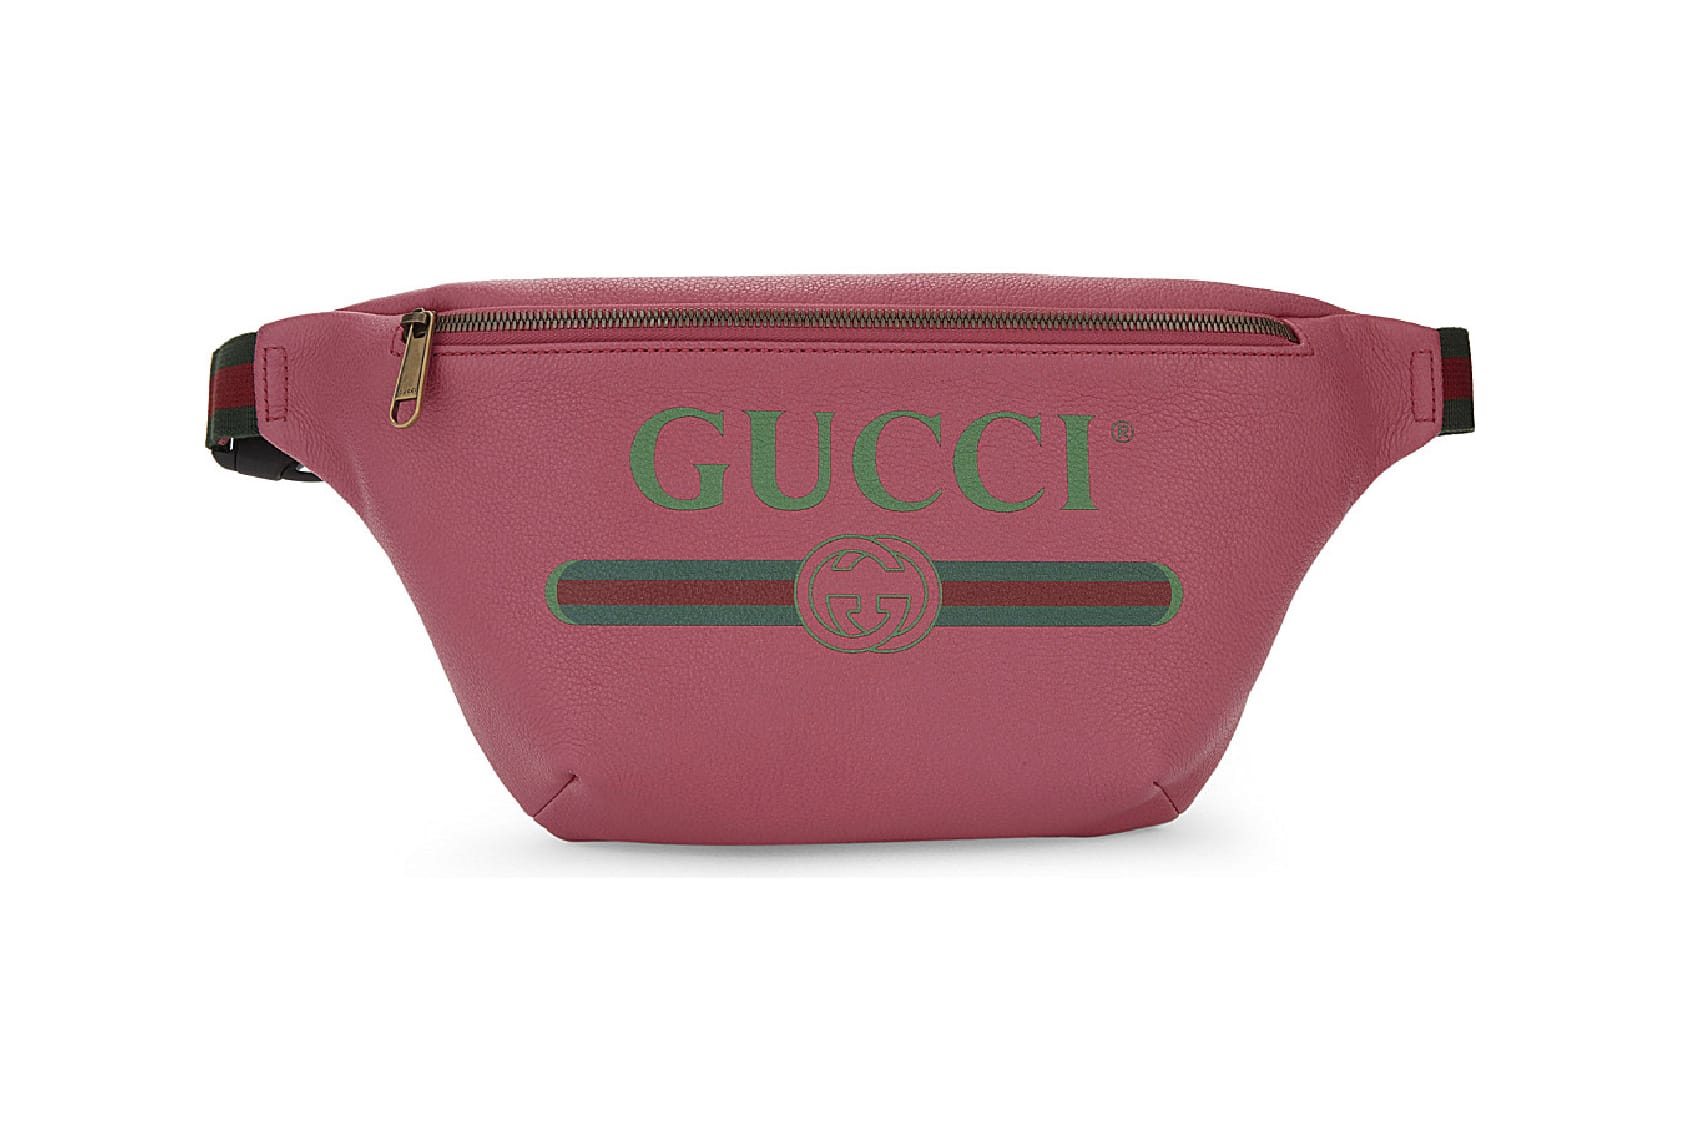 gucci fanny pack pink